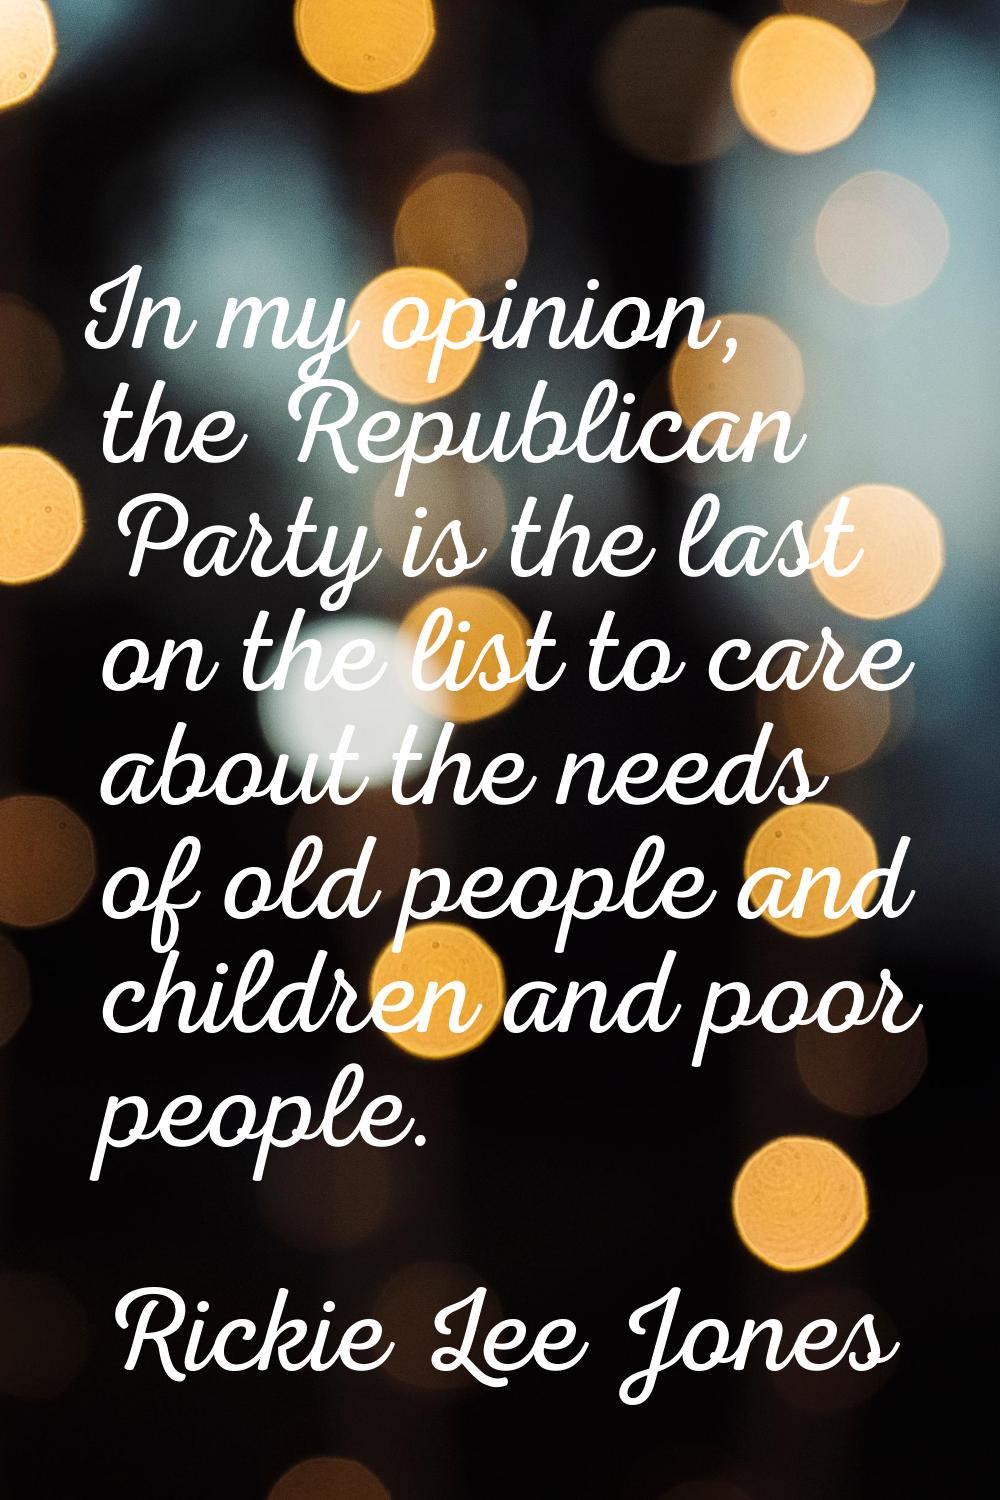 In my opinion, the Republican Party is the last on the list to care about the needs of old people a